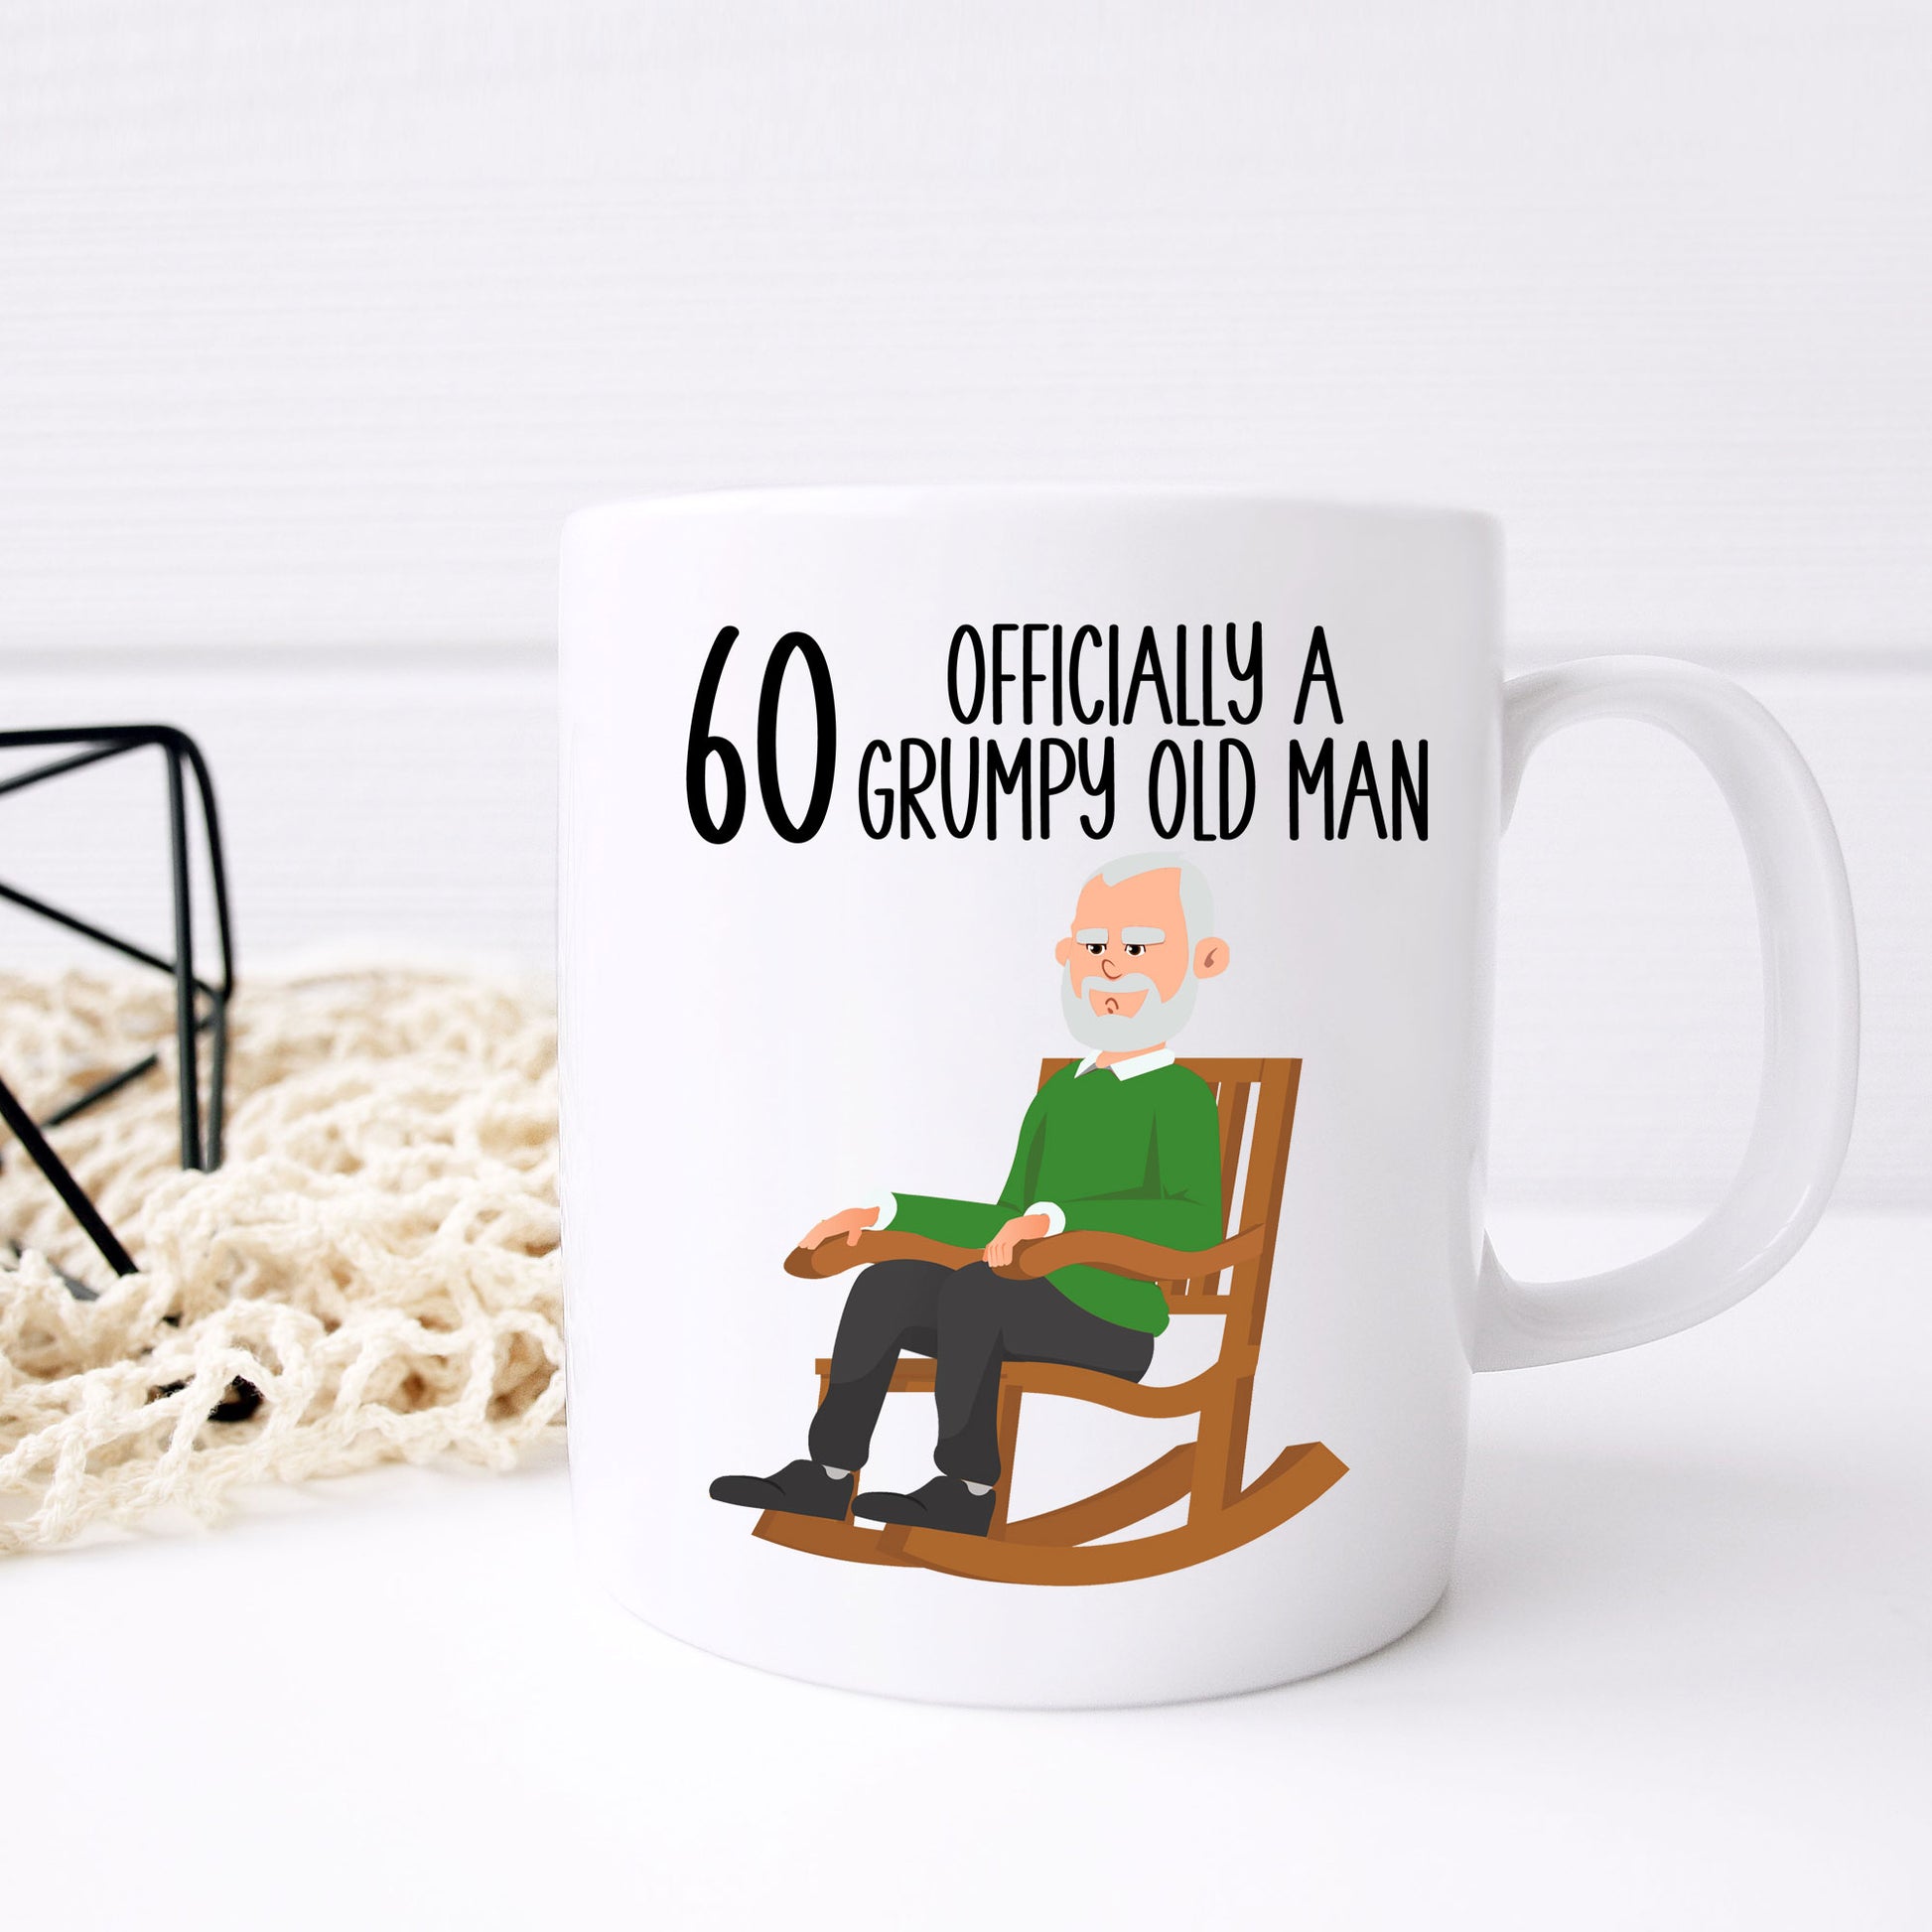 60 Officially A Grumpy Old Man Mug and/or Coaster Gift  - Always Looking Good - Mug On Its Own  